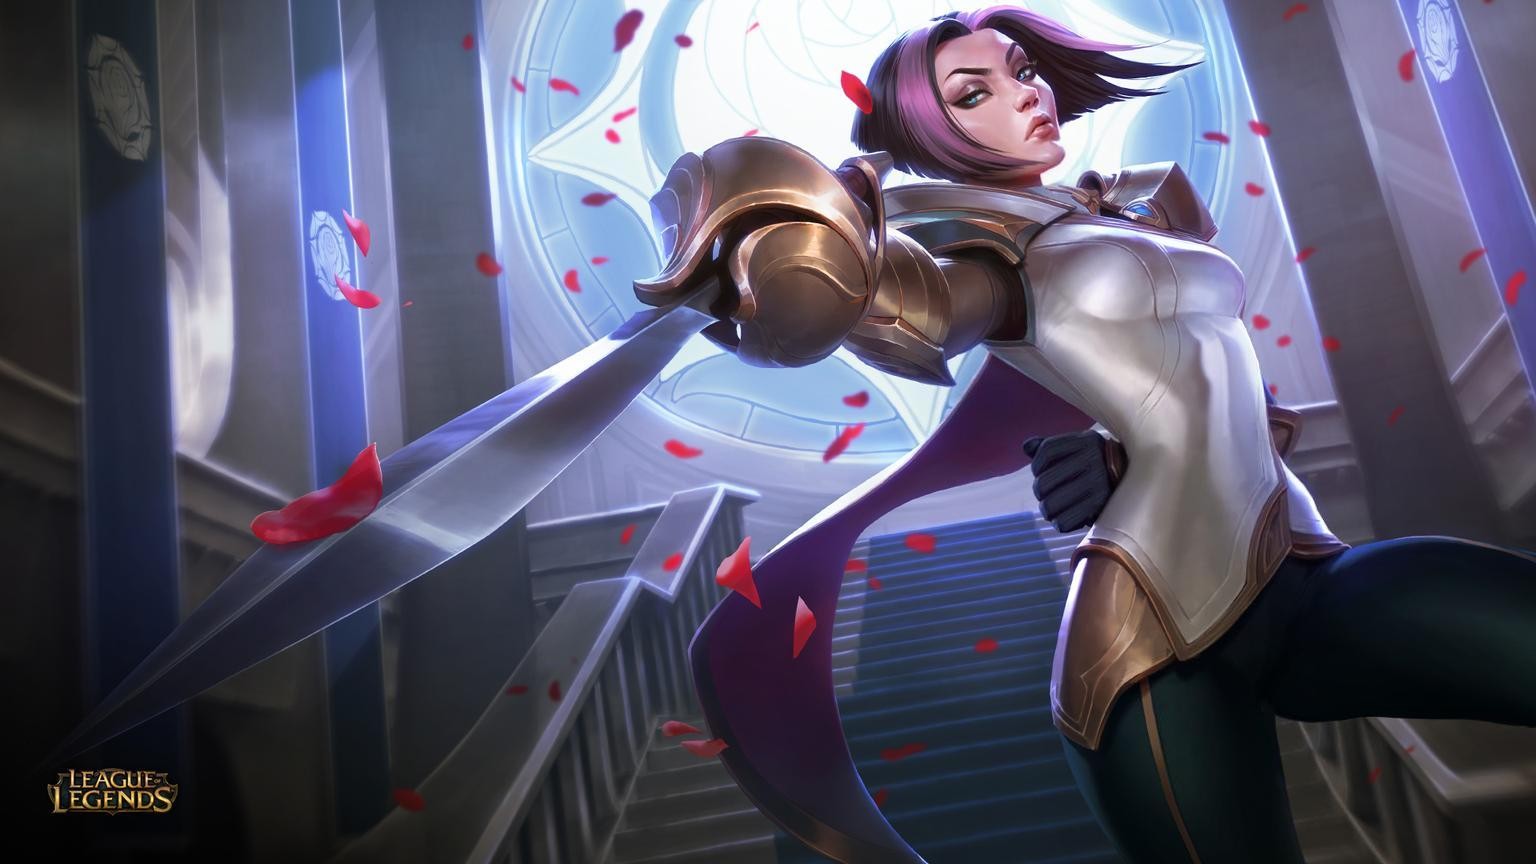 General 1536x864 League of Legends PC gaming fantasy girl weapon Fiora (League of Legends) video game characters video game girls sword women with swords